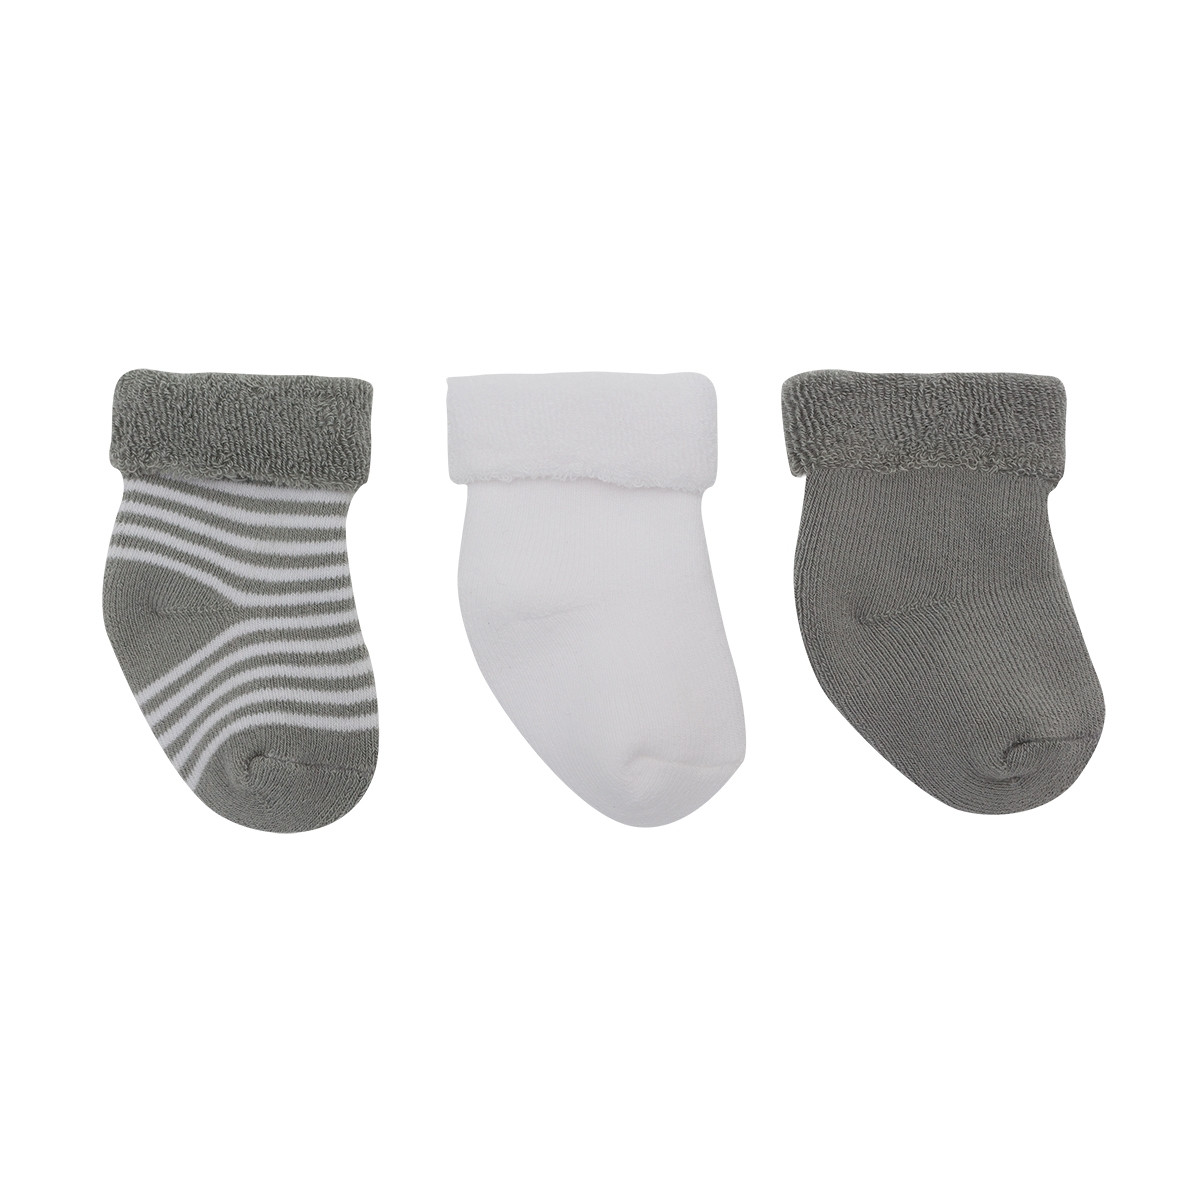 SET 3 SOCKS FOR BABY LISO GREY CAMBRASS - 1